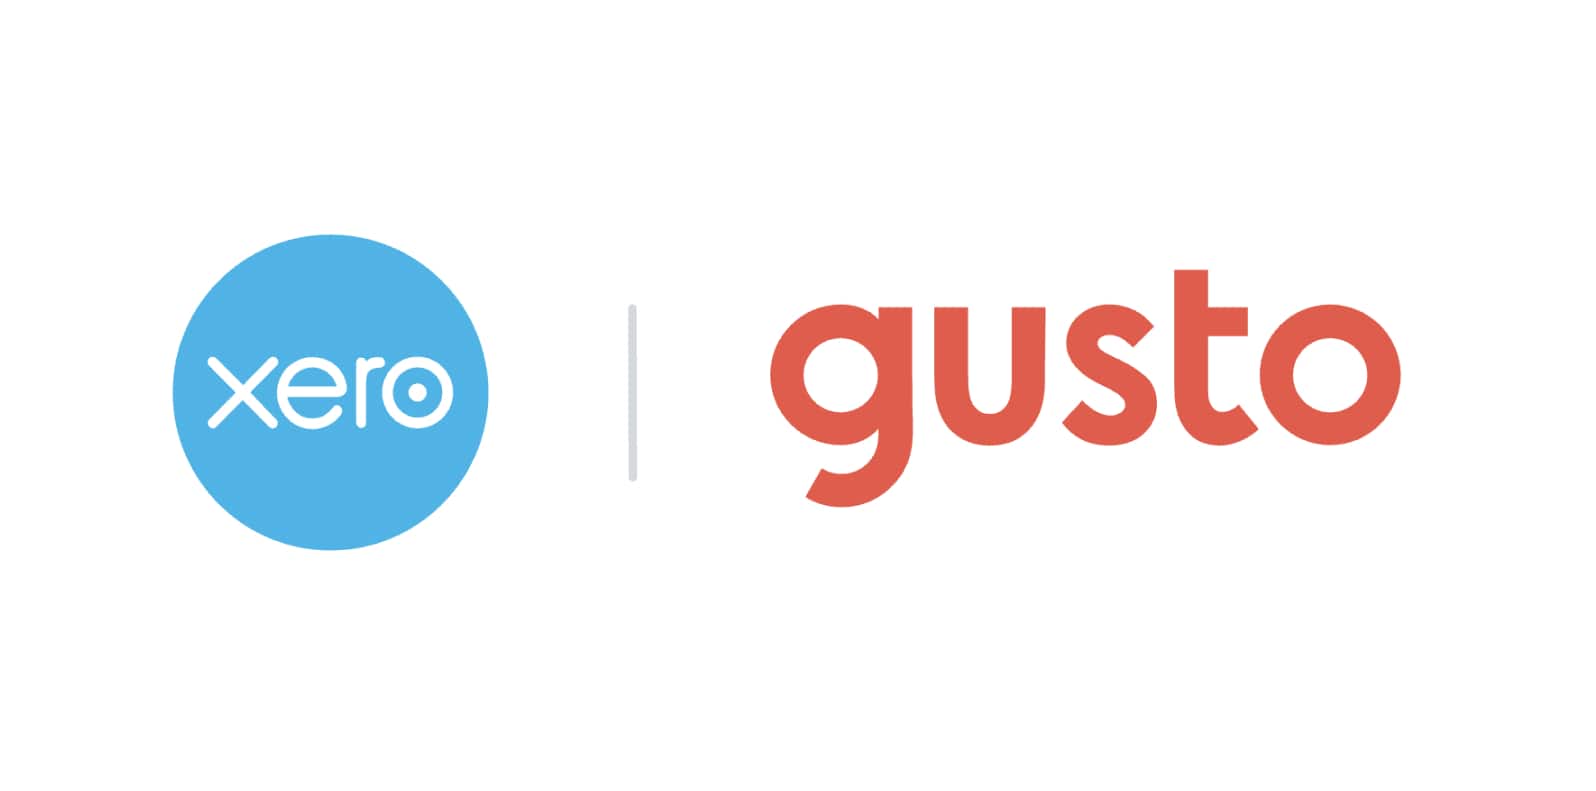 Gusto is Xero’s preferred payroll provider in the United States